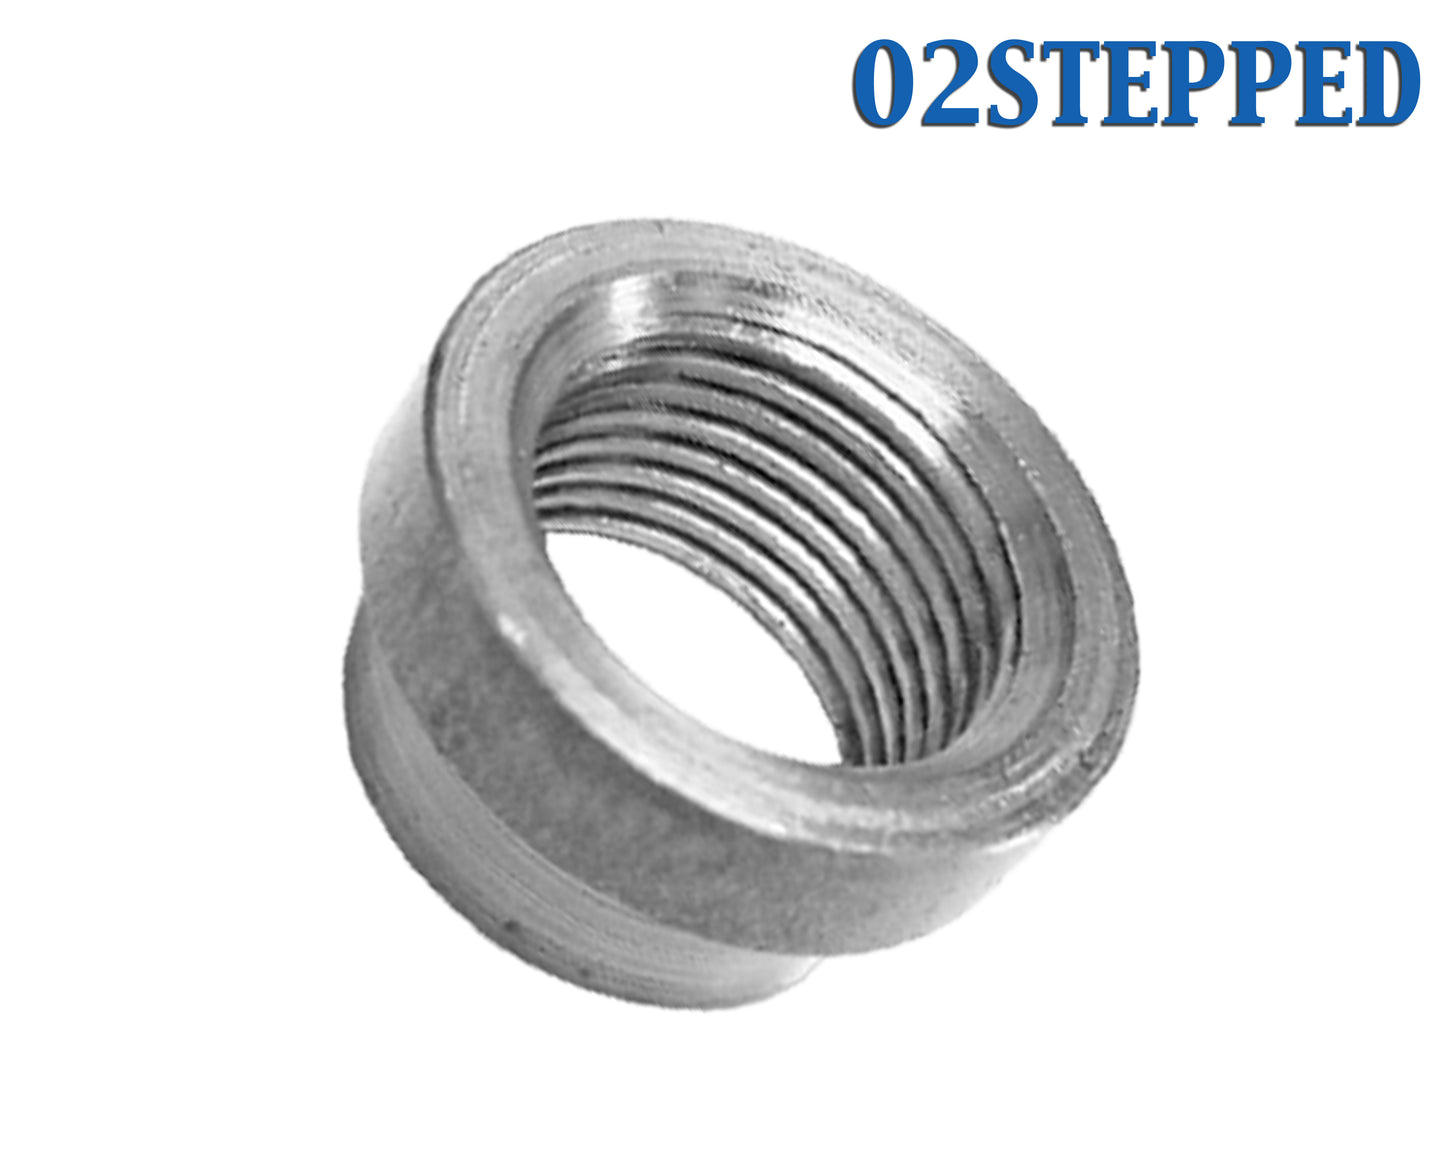 O2STEPPED O2 Oxygen Sensor Stepped Style Bung Port Boss Nut Fitting 18mm